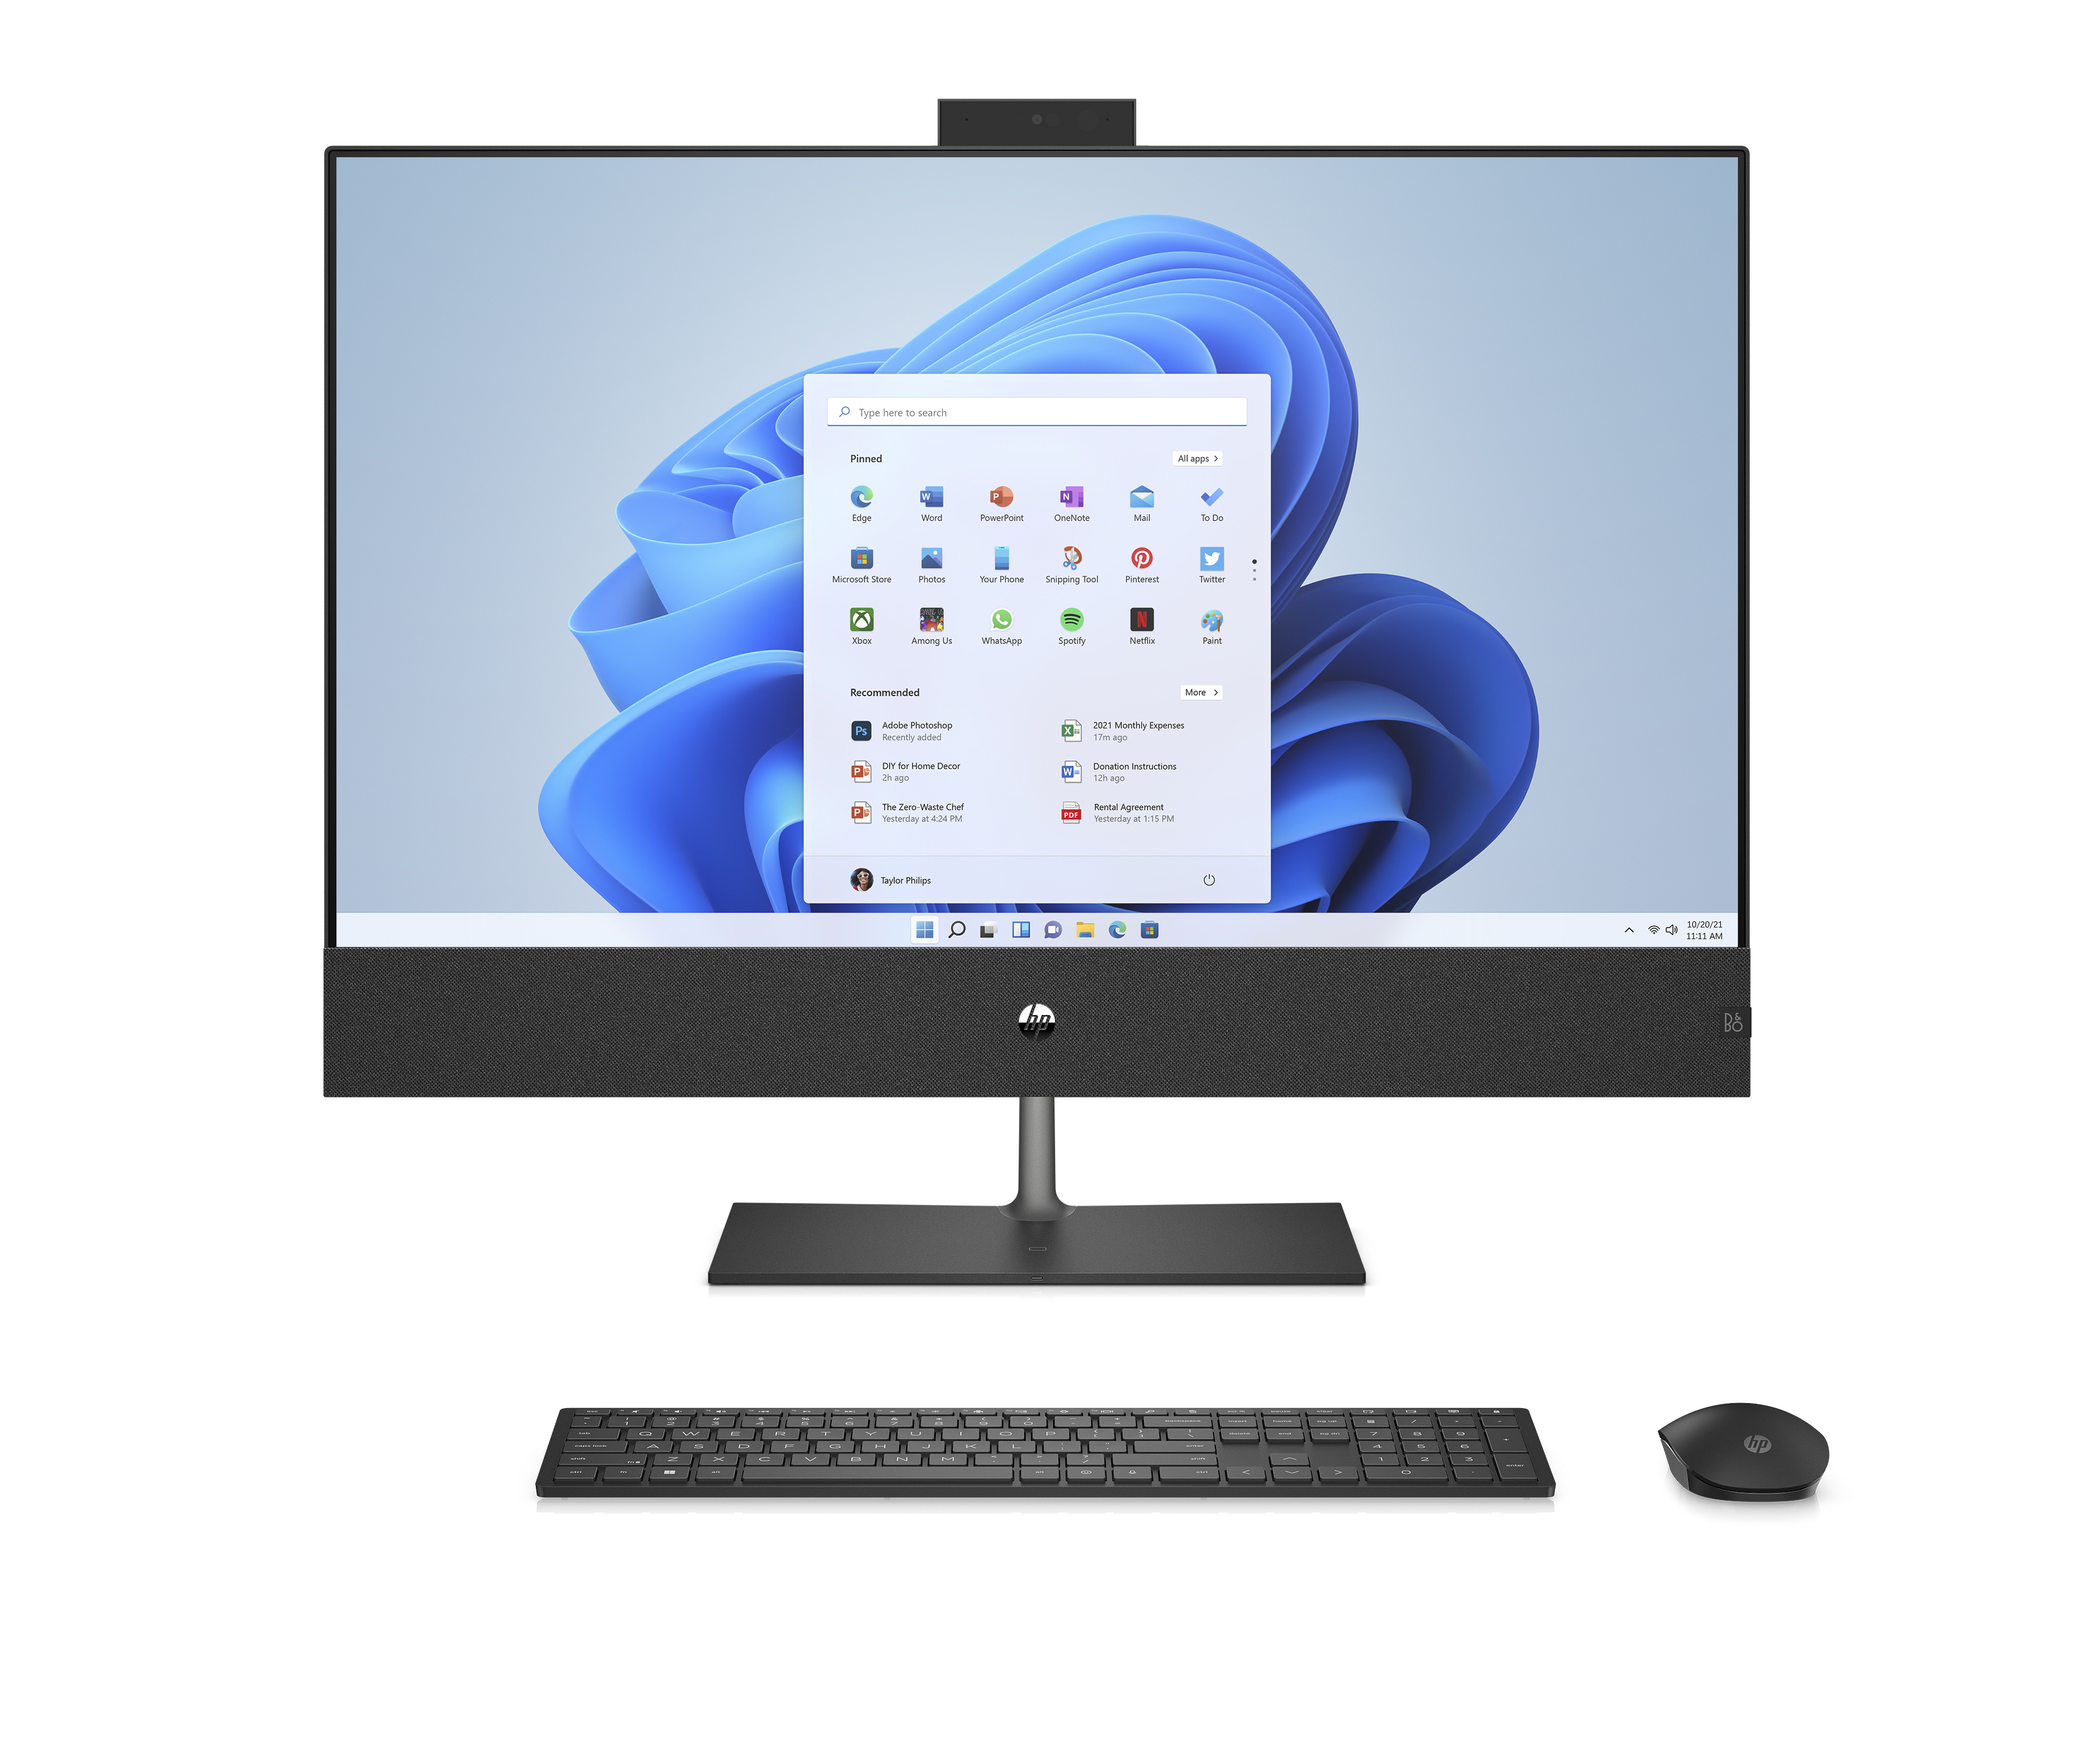 HP introducesnewAll-In-One PCs to enablehybrid lifestyle for creators